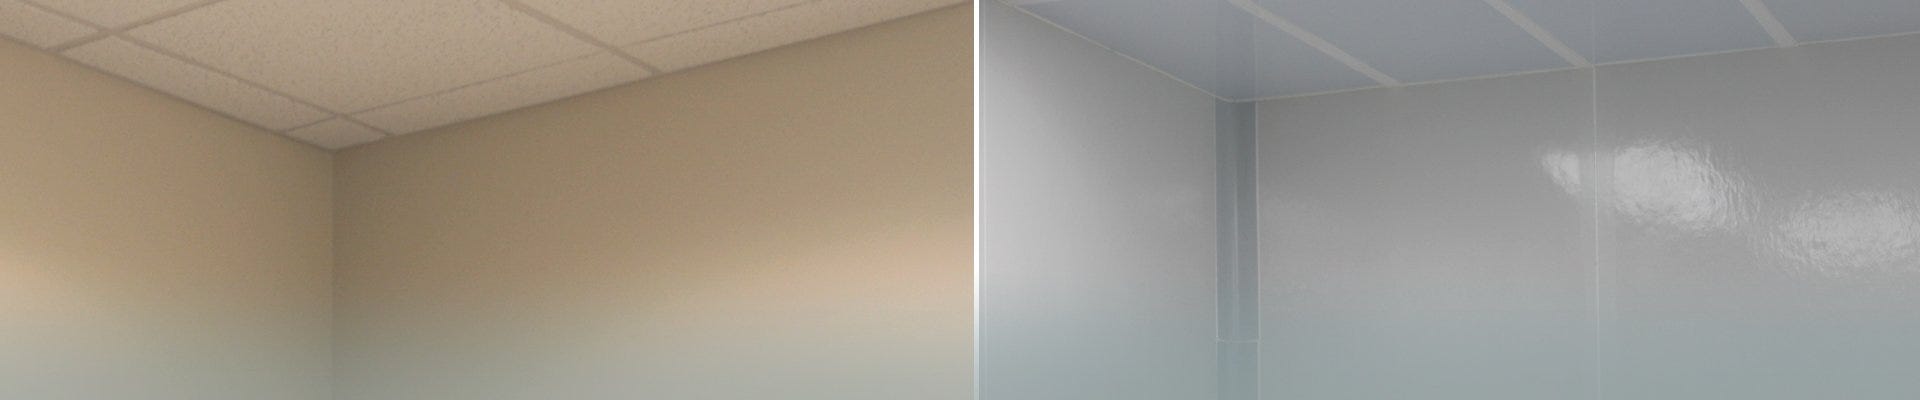 Cleanroom conversion components include ceiling grid, FFUs, and iso=compatible wall panels